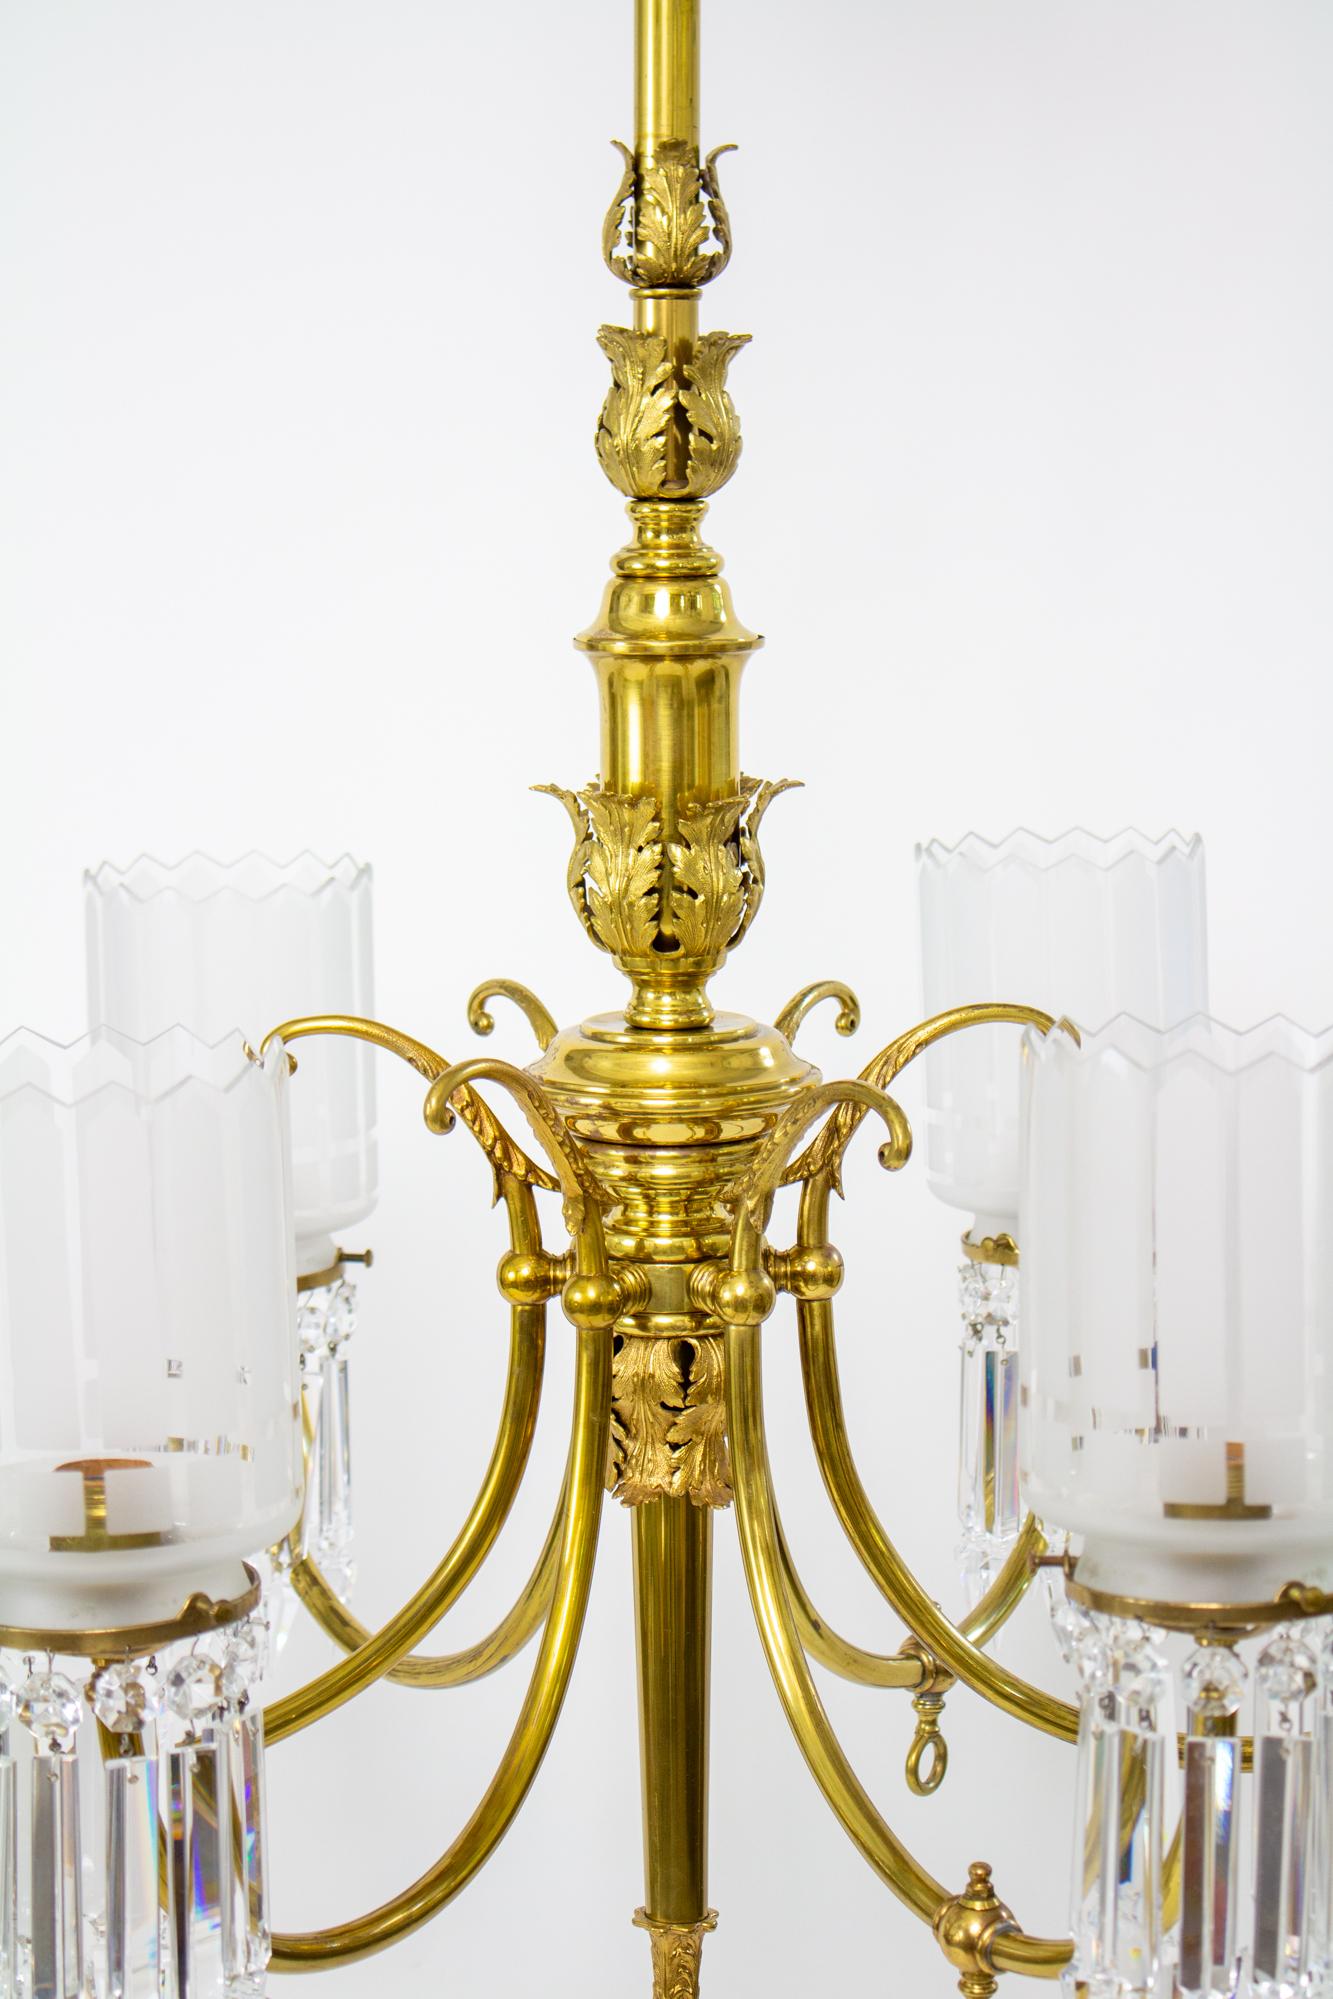 19th Century Gas and Electric Brass and Crystal Chandelier. Brass six light fixture with colonial crystal spears and cylindrical glass shades that reflect the points of the colonial crystals. Six arms, three of which have the original gas cocks and